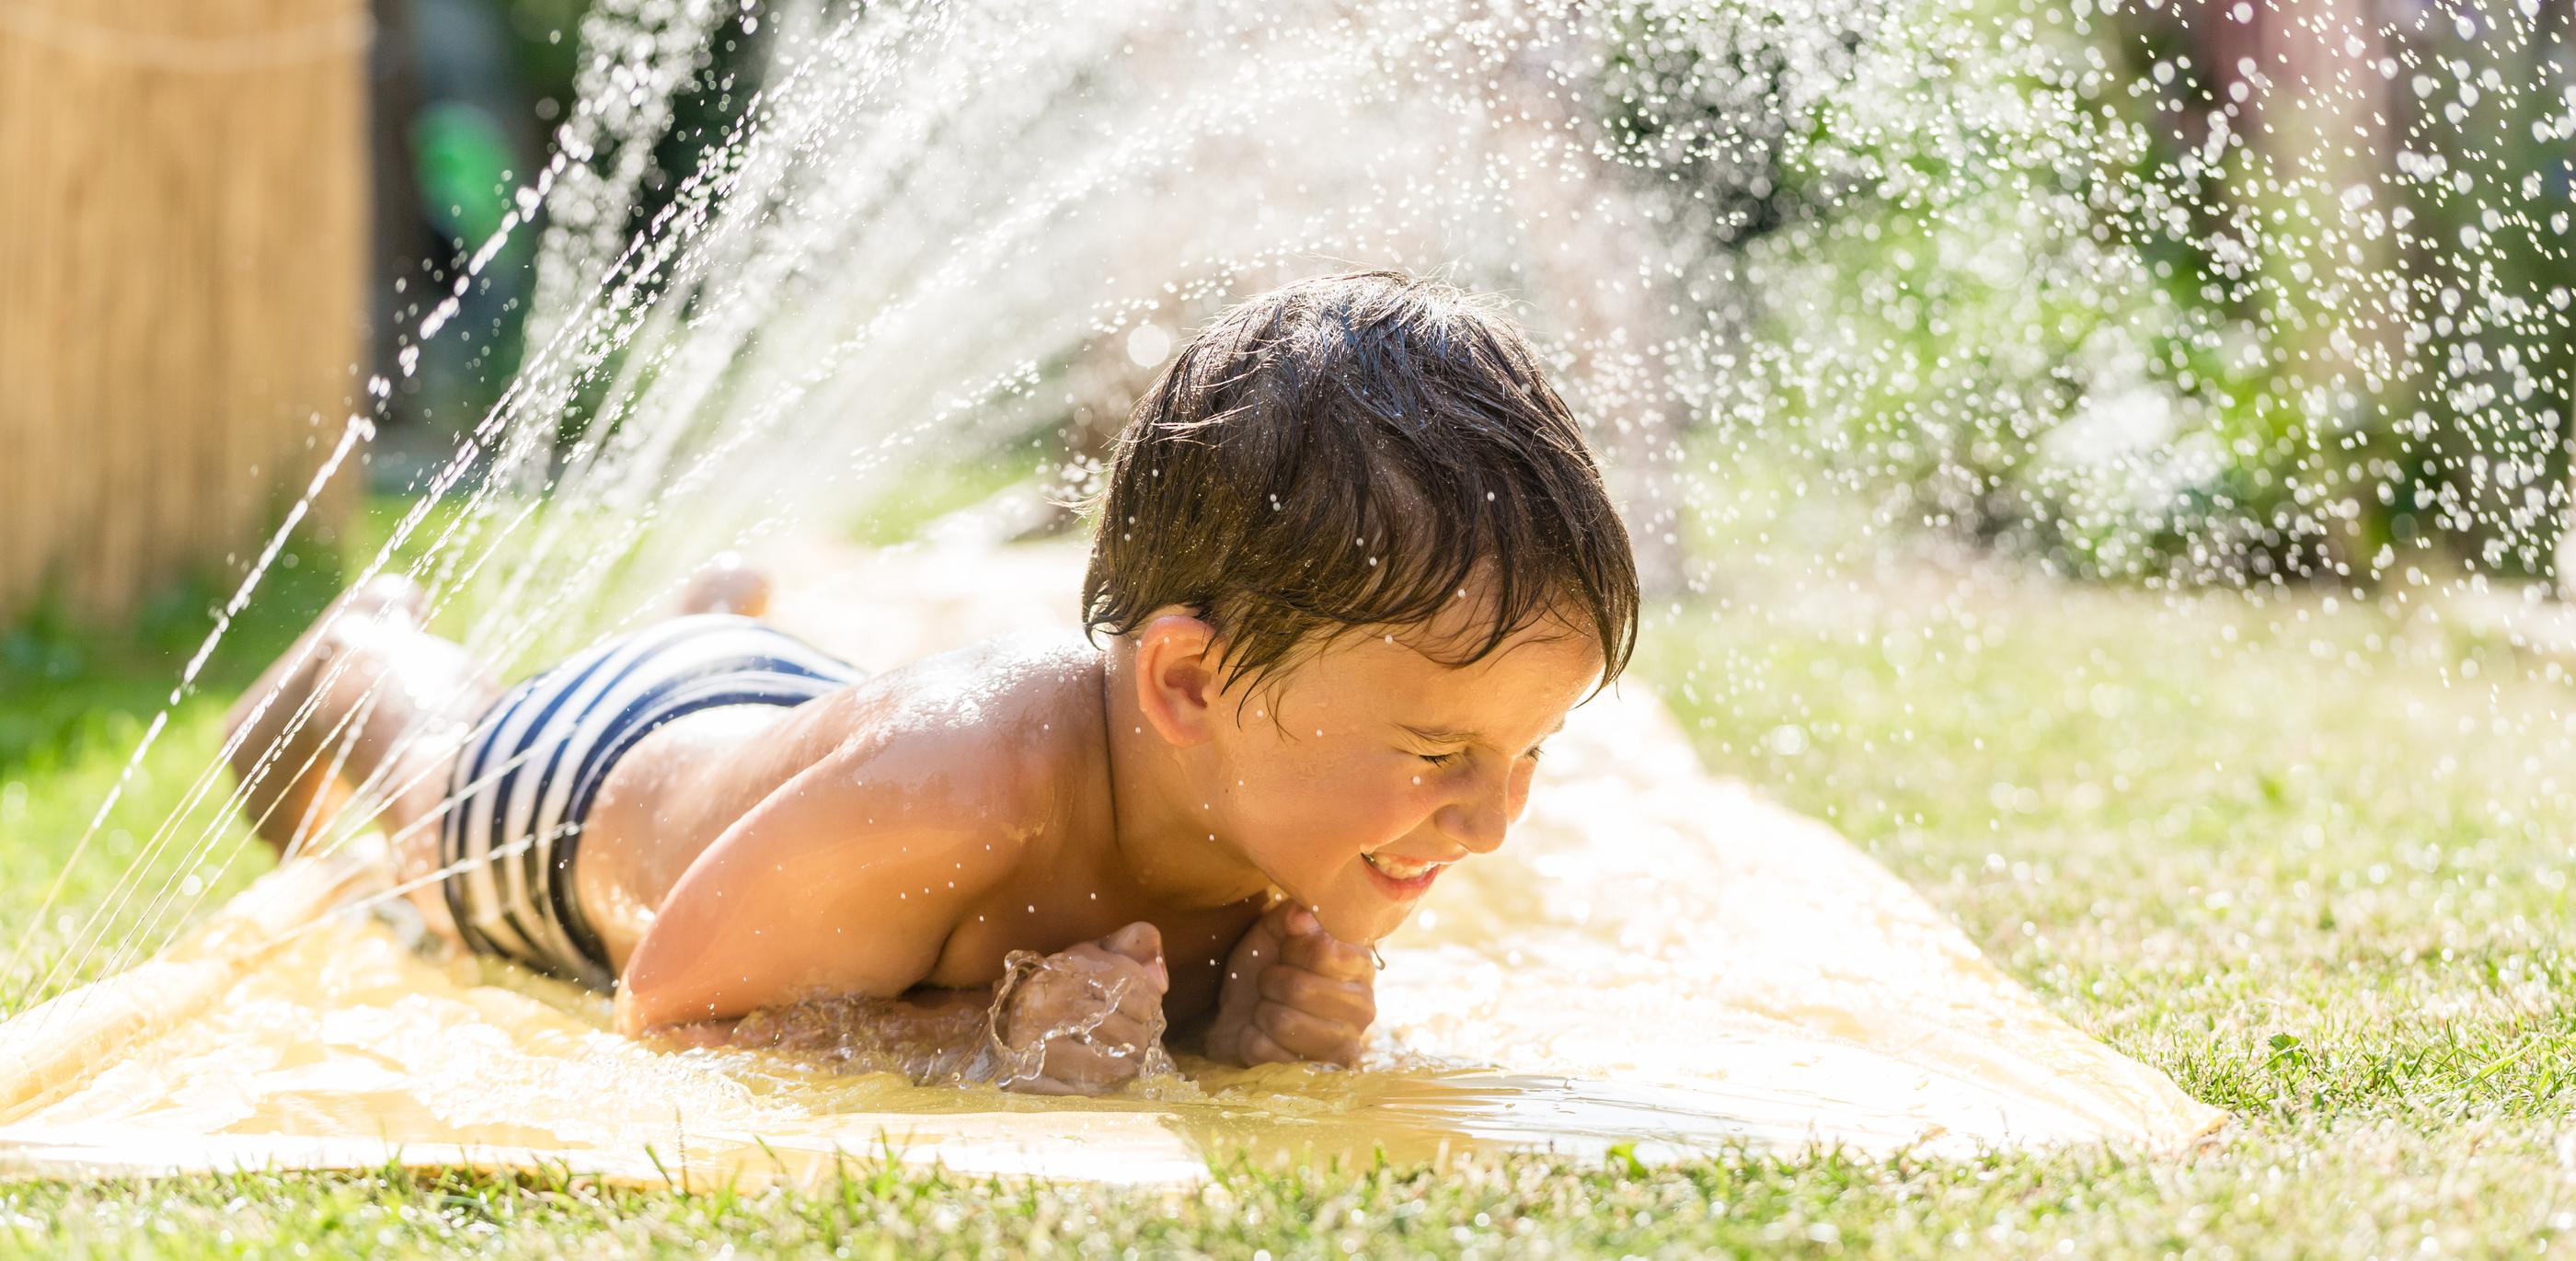 Plumber Advice: How to Have a Carefree Summer with Kids